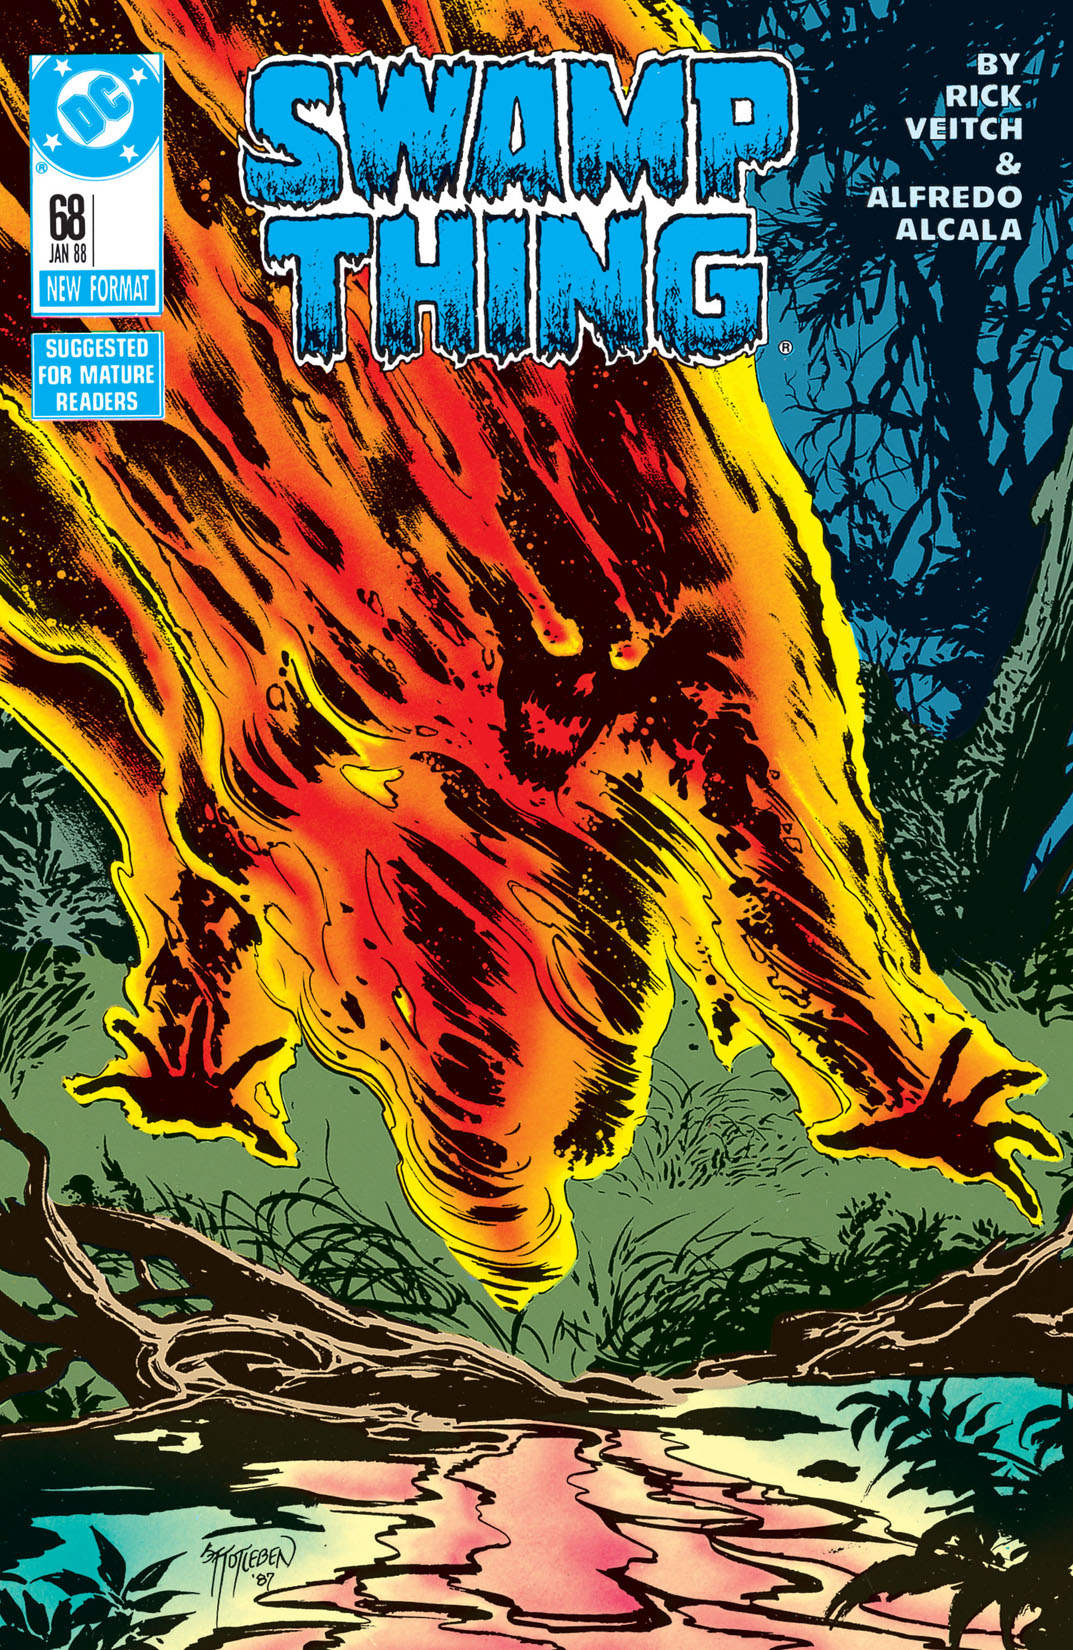 Swamp Thing (1985-1996) #68 preview images